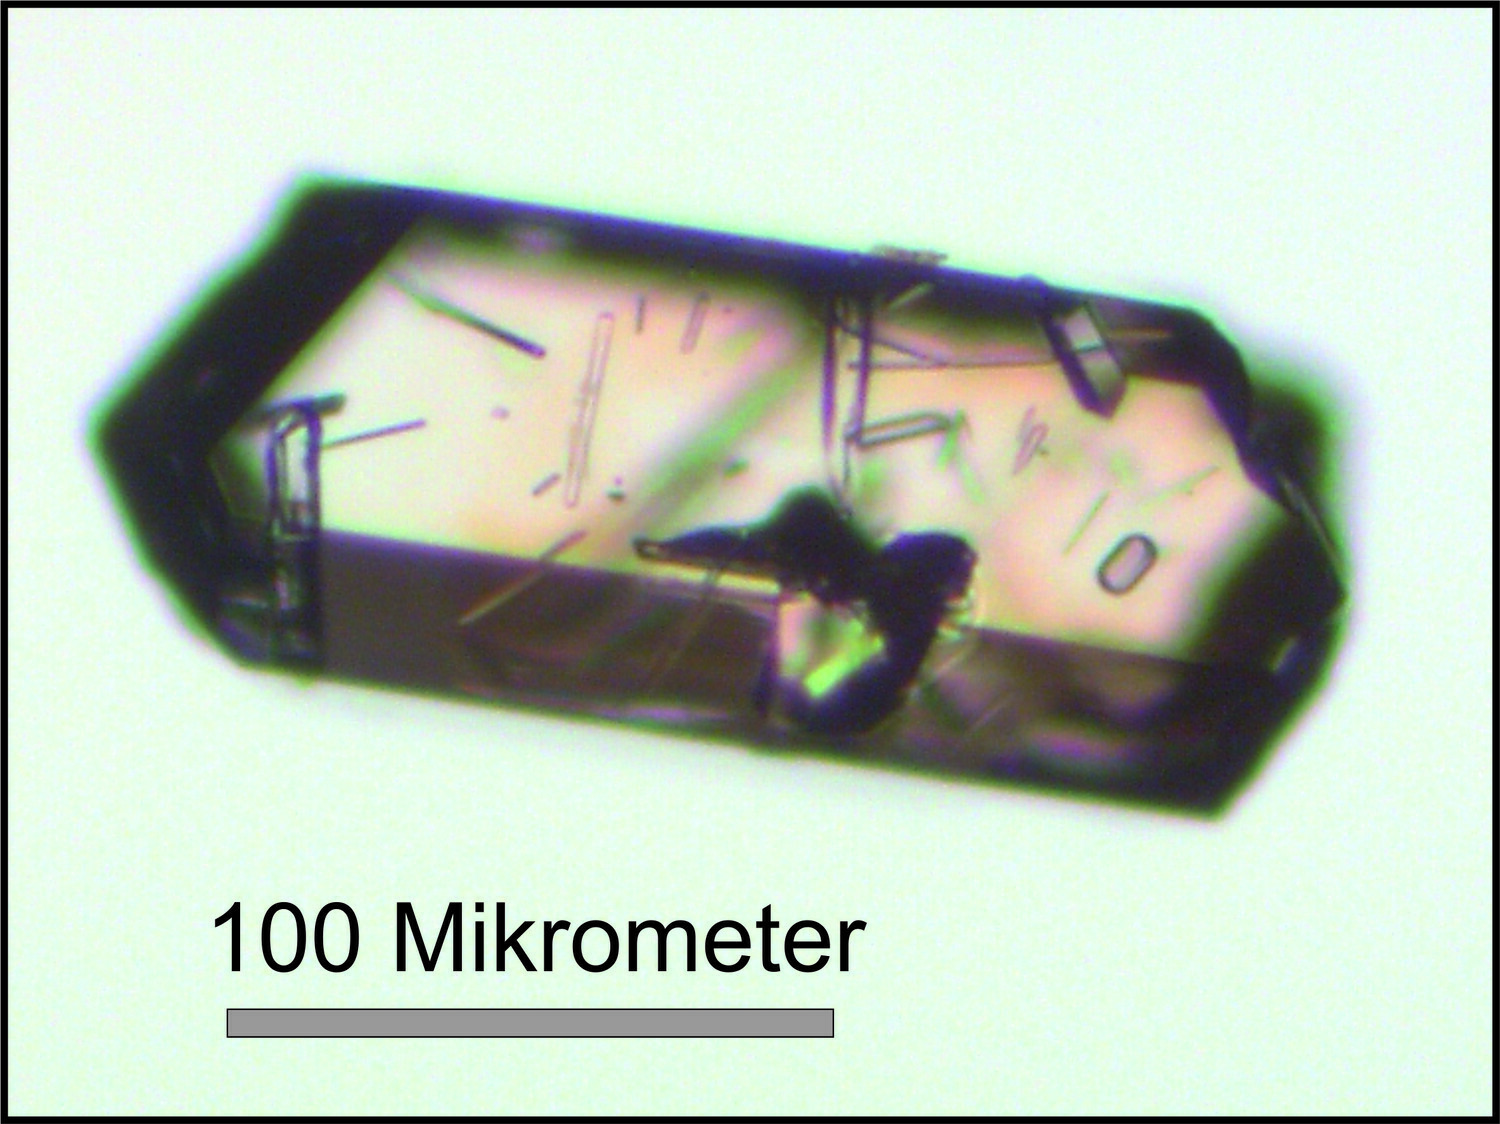 Example of a slightly pink zircon crystal of the volcanic ash layer, which could be dated to an age of 14.20 ± 0.08 million years using the uranium-lead method.